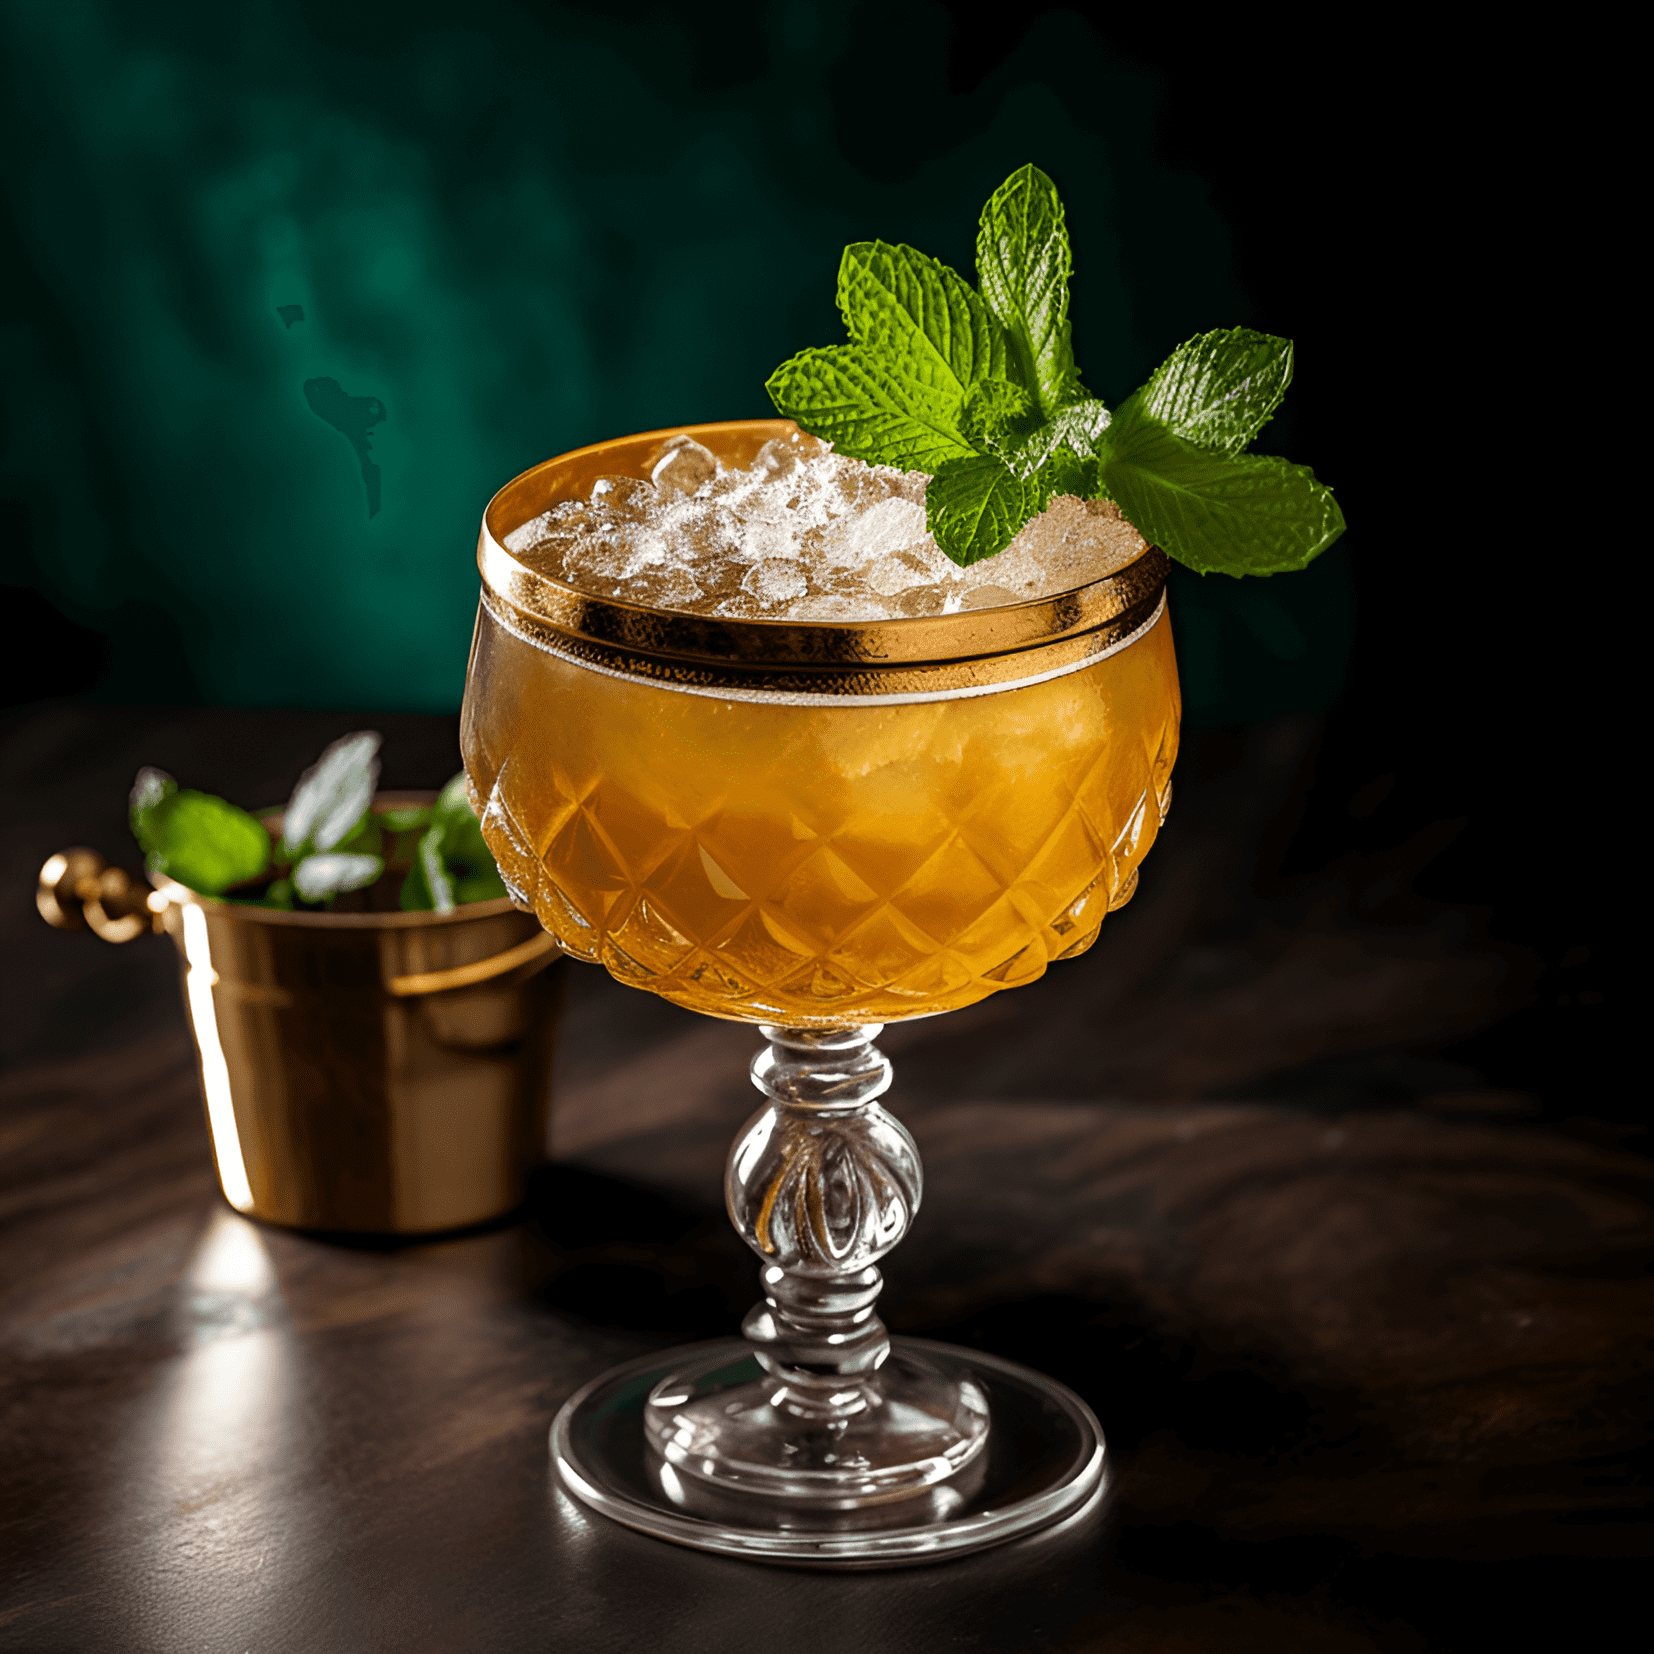 Brandy Cobbler Cocktail Recipe - The Brandy Cobbler has a well-balanced, fruity, and slightly sweet taste. The brandy provides a rich, warming base, while the citrus and sugar add a refreshing tang. It is a light and easy-drinking cocktail that is perfect for sipping on a warm day.